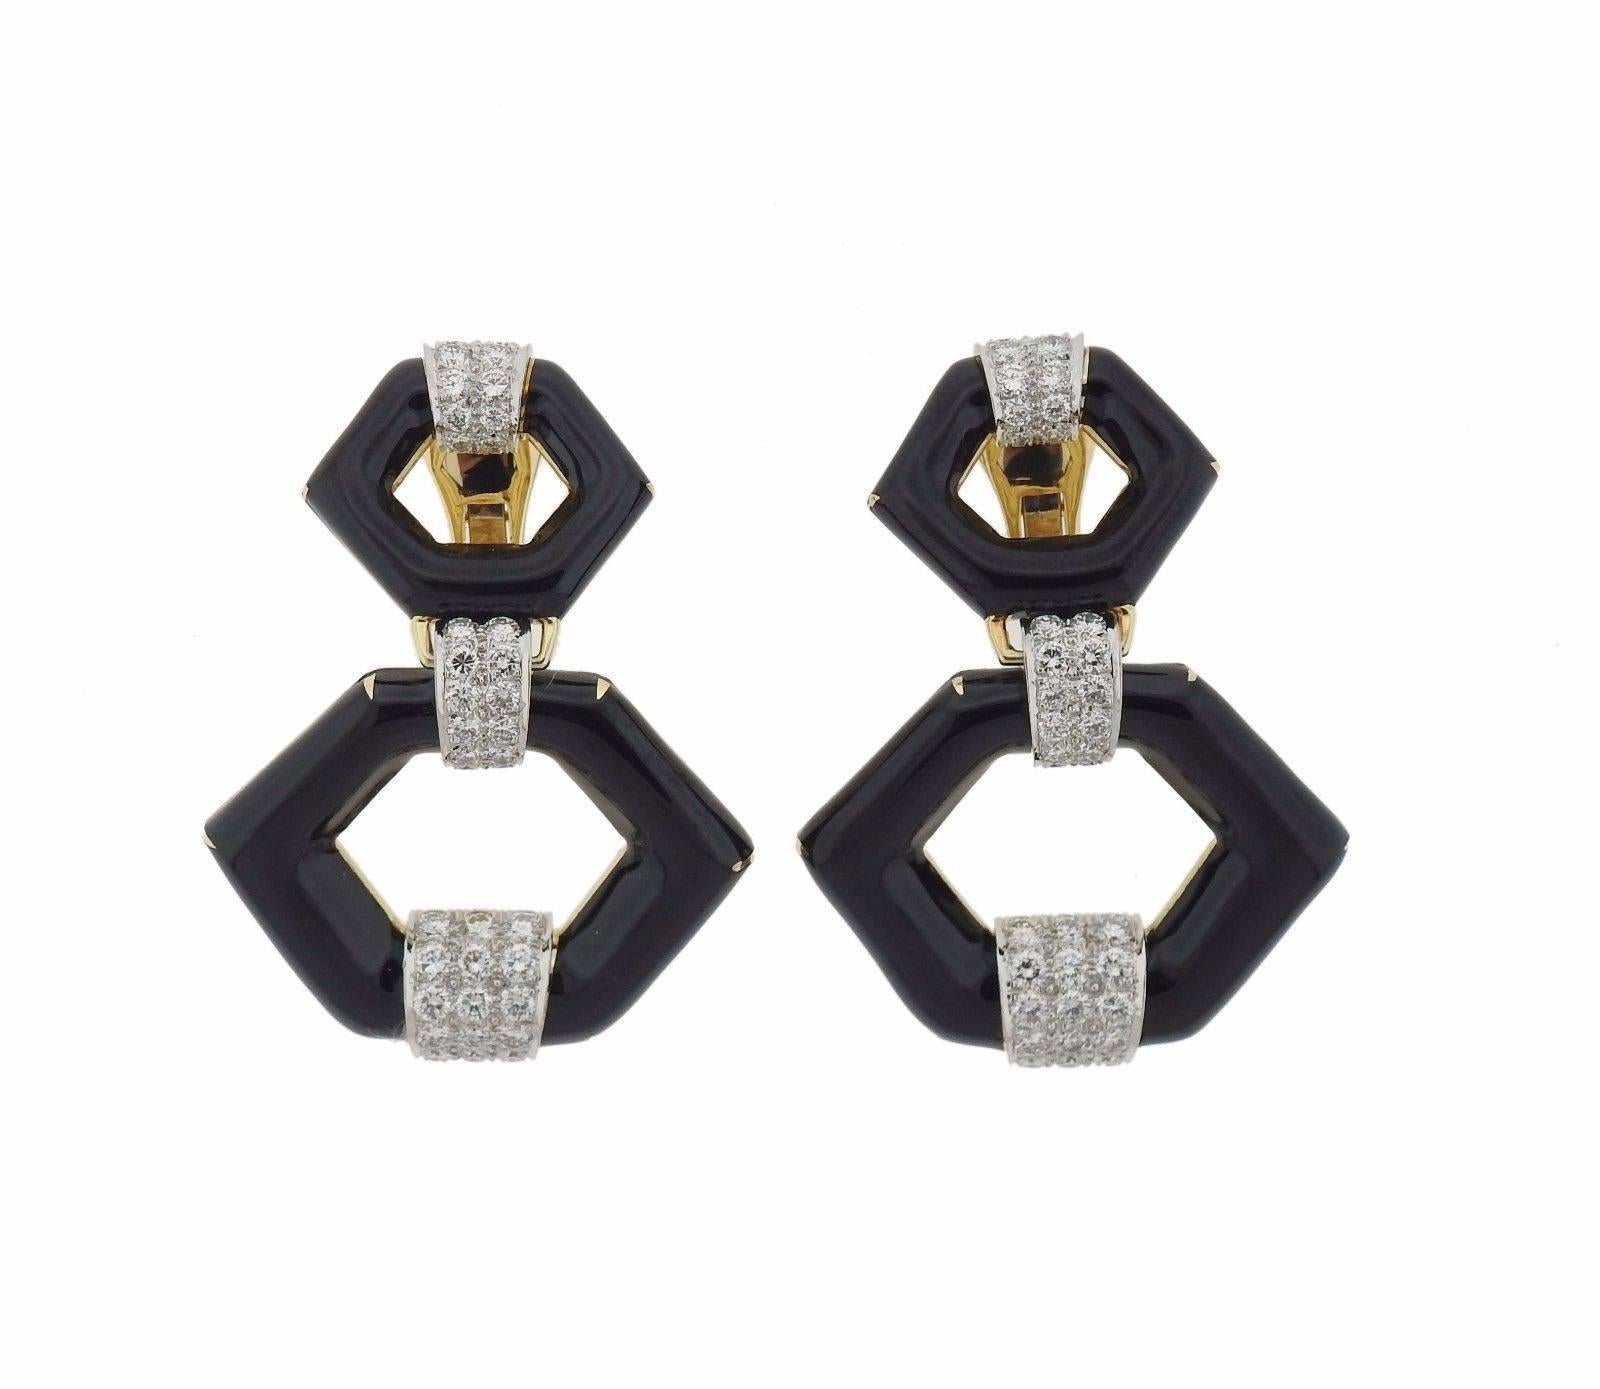 A pair of 18k gold earrings set with 3.60ctw of G/VS diamonds and black enamel.  The earrings measure 55mm x 38mm and weigh 48.9 grams.  Marked: Webb, 18k, Plat.  The current retail is $36500.